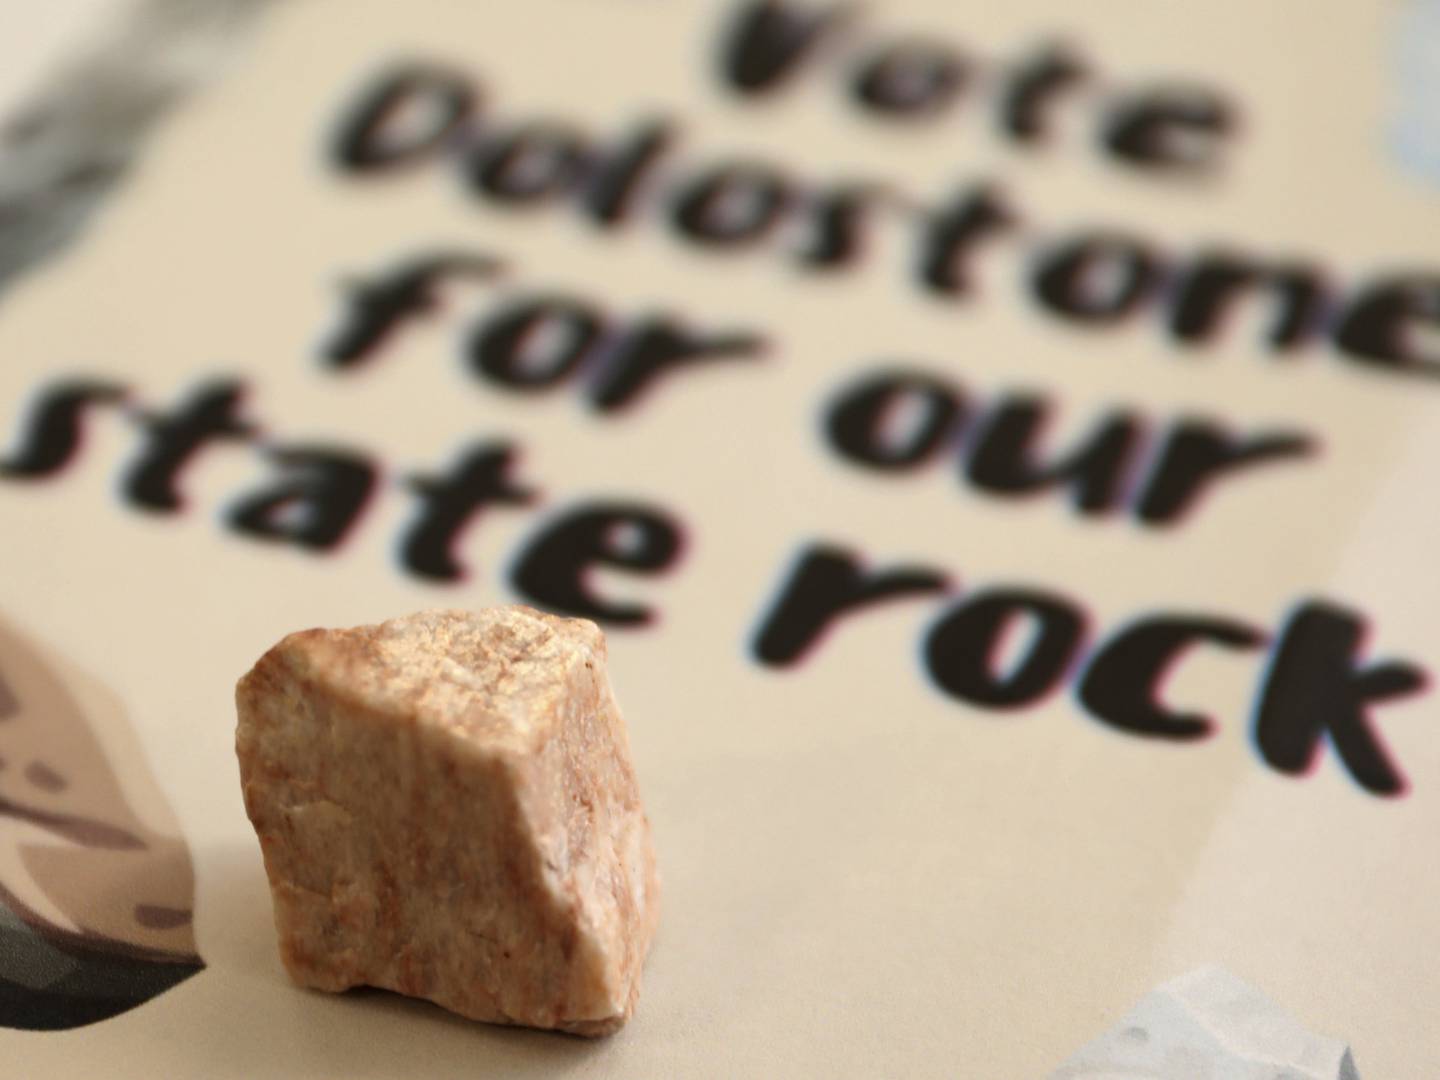 Dolostone becomes the official state rock, thanks to a lobbying effort that was joined by students at Pleasantdale Middle School in Burr Ridge.